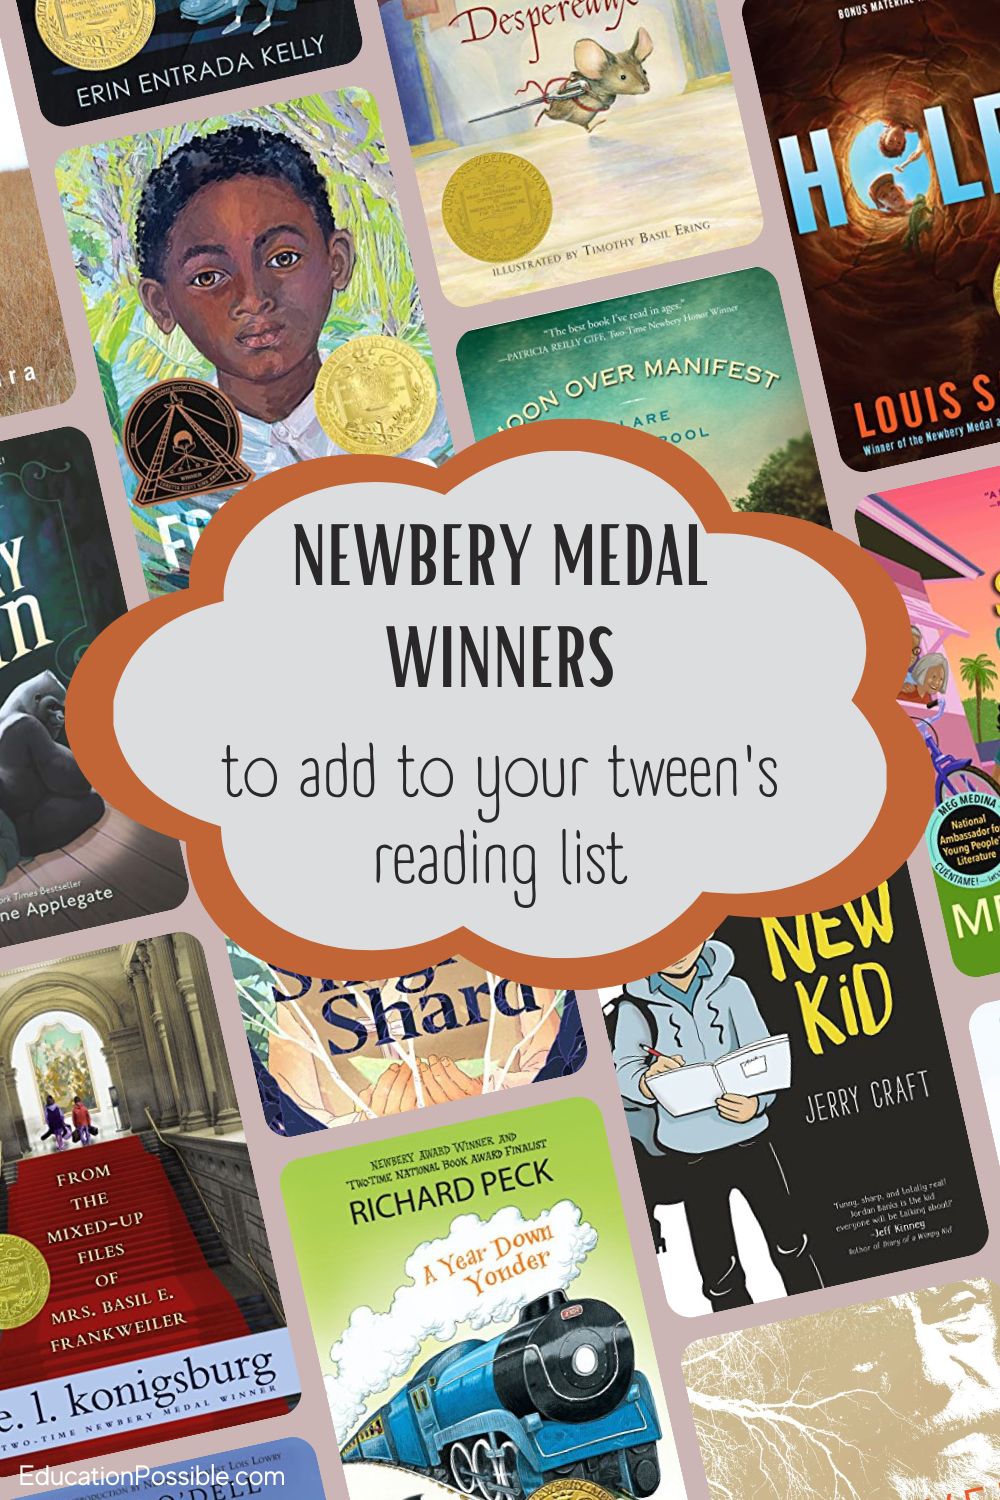 A collage of book covers - all Newbery Medal award winners.